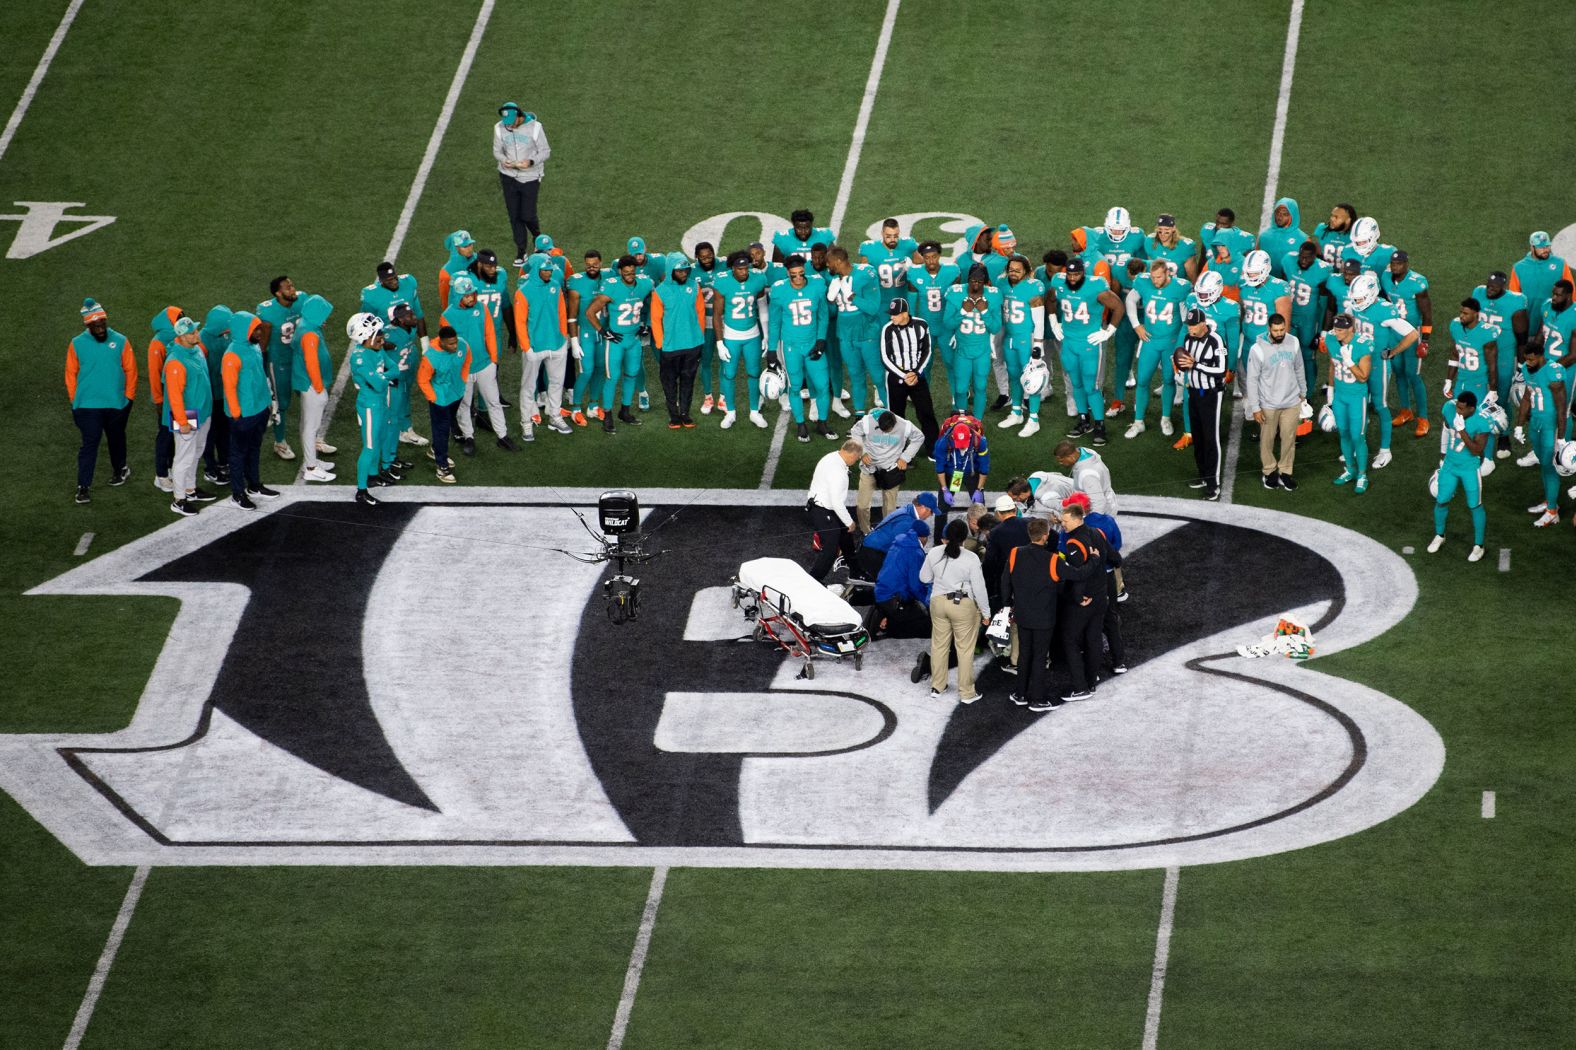 Teammates gather around Miami Dolphins quarterback Tua Tagovailoa after he suffered a concussion during a game against the Cincinnati Bengals on Thursday, September 29. <a href="https://www.cnn.com/2022/10/03/sport/nfl-concussion-scrutiny-tua-tagovailoa-spt-intl" target="_blank">An investigation is now underway</a> into the handling of Tagovailoa's apparent head injury, while the unaffiliated neurotrauma consultant who was involved in the quarterback's first concussion evaluation four days earlier is reportedly no longer working with the National Football League Players Association.